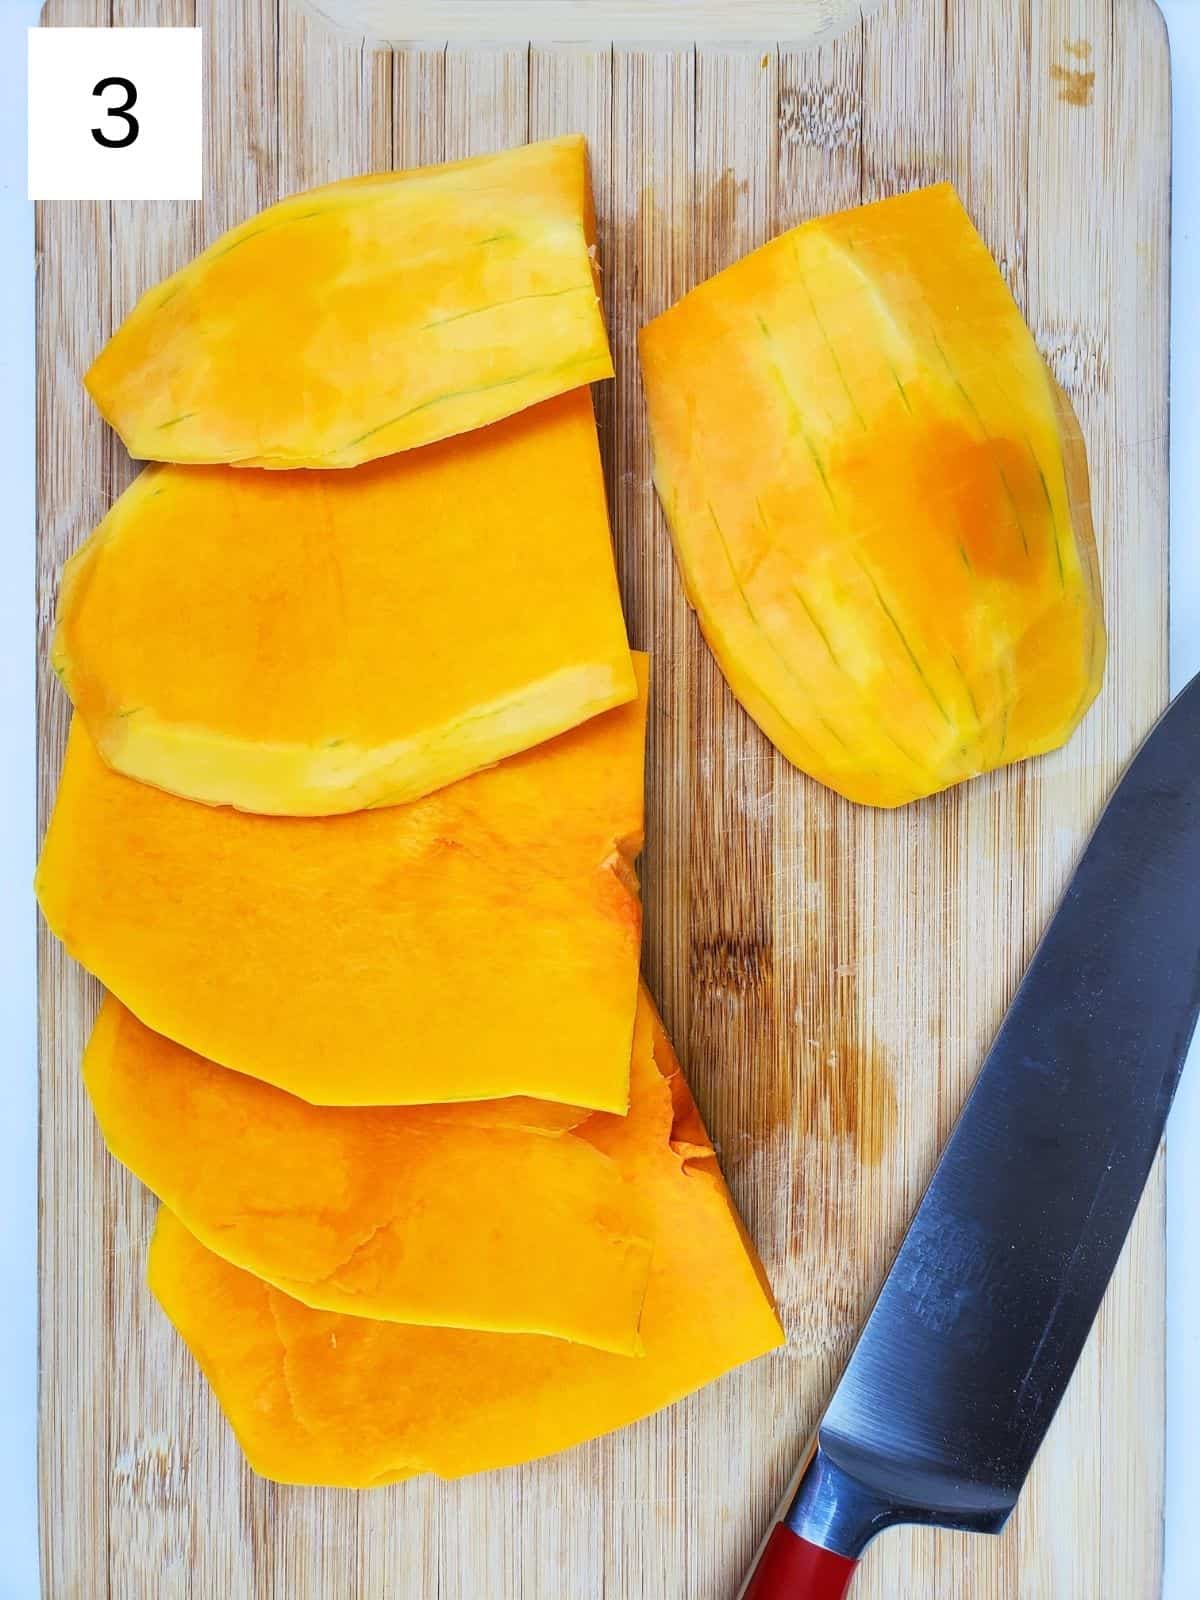 thinly sliced butternut squash on a wooden chopping board.